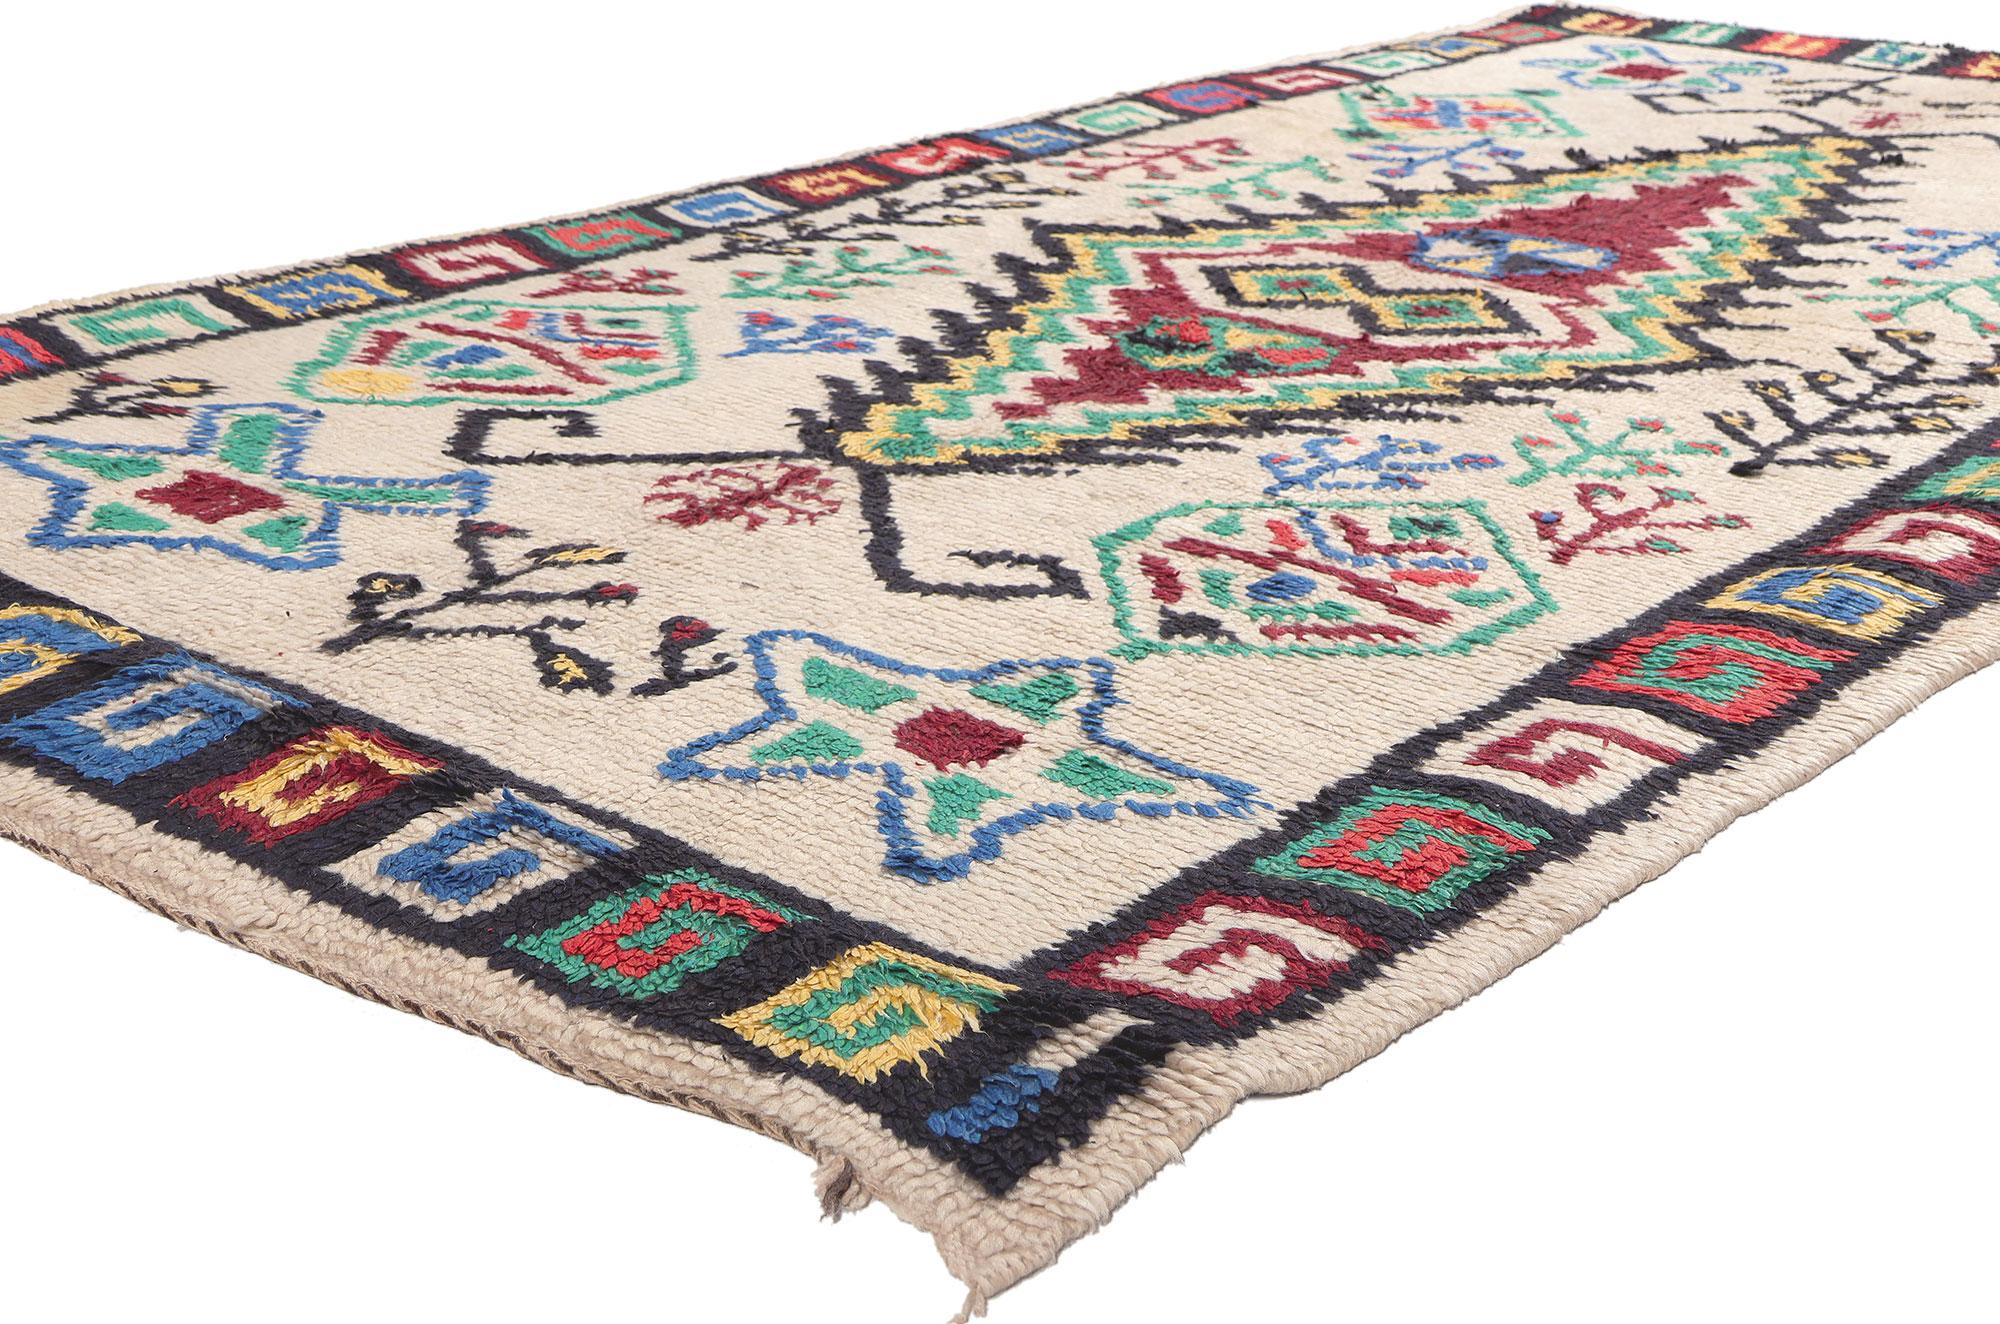 20320 Vintage Moroccan Azilal Rug, 04'07 x 08'09. Embark on a journey of tribal enchantment with this vibrant Azilal Moroccan rug, meticulously hand-knotted from soft wool. The colorful Azilal rug unfolds against a warm beige backdrop, revealing a